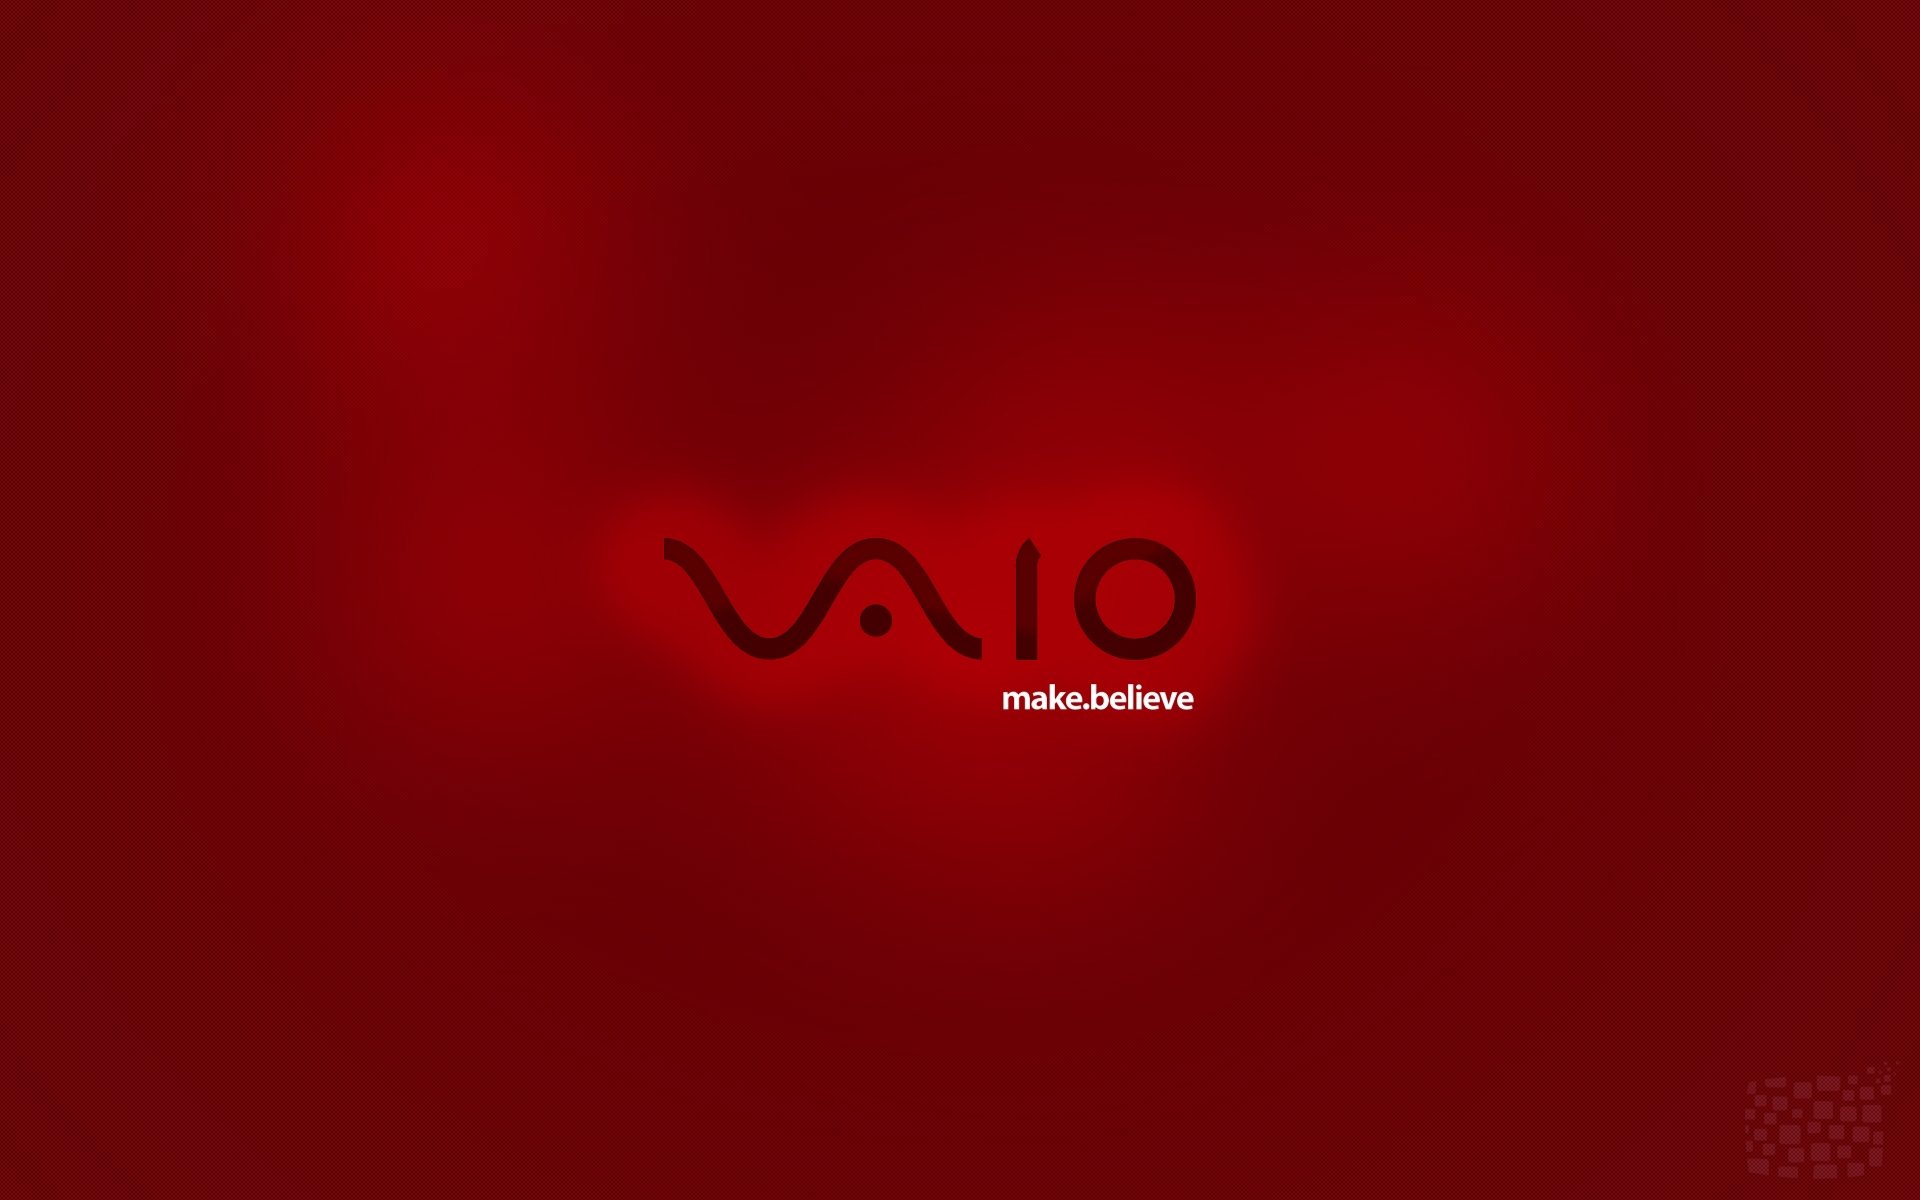 Sony Vaio Wallpaper Hd Wallpaper Background Image 1920x1200 Id 117085 Wallpaper Abyss